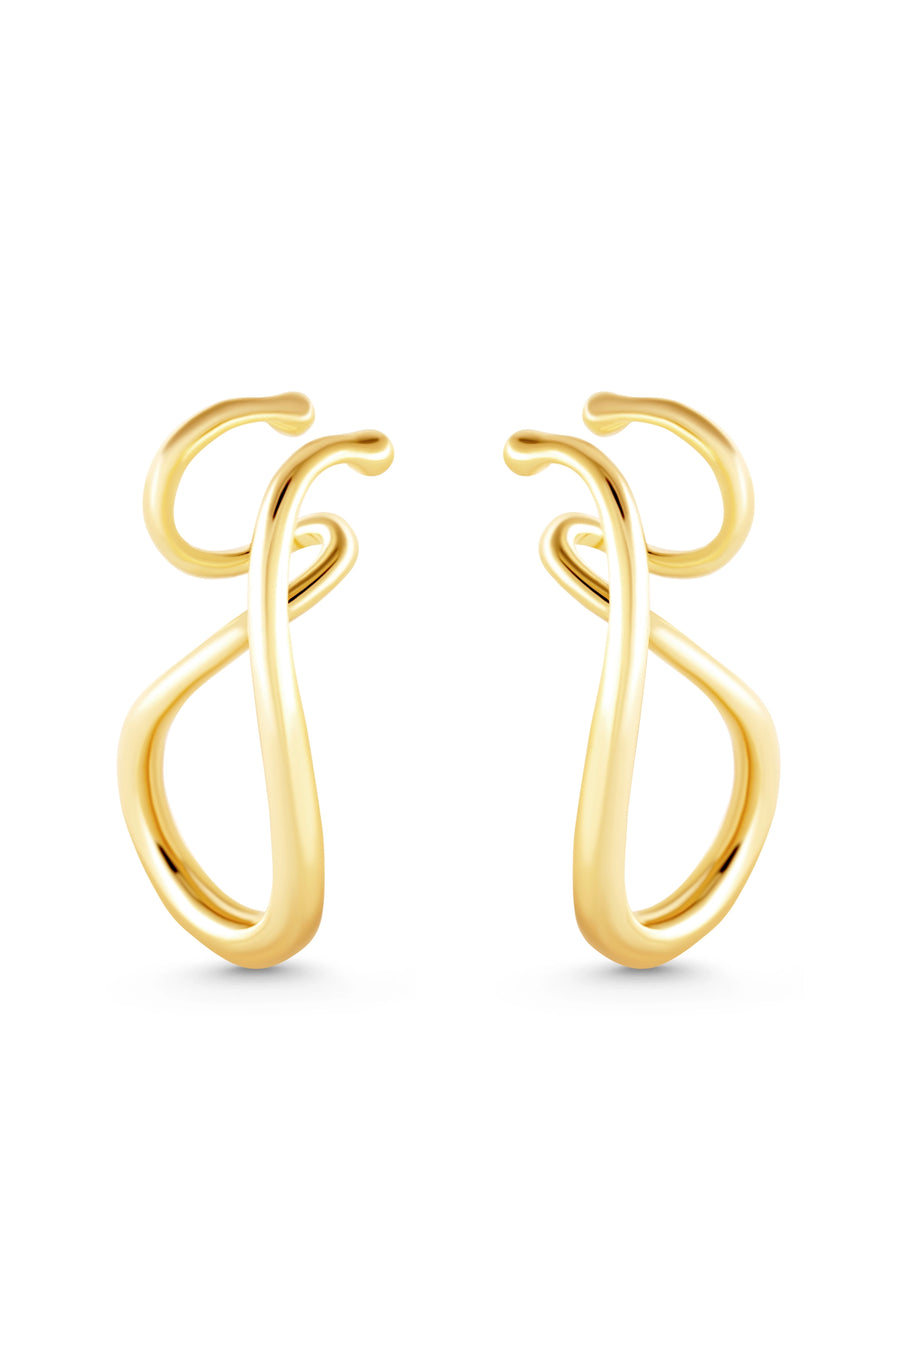 AQUIVER Ear Cuffs. Twisted lines design, no piercings required, 18K gold vermeil, handmade, hypoallergenic, water-resistant